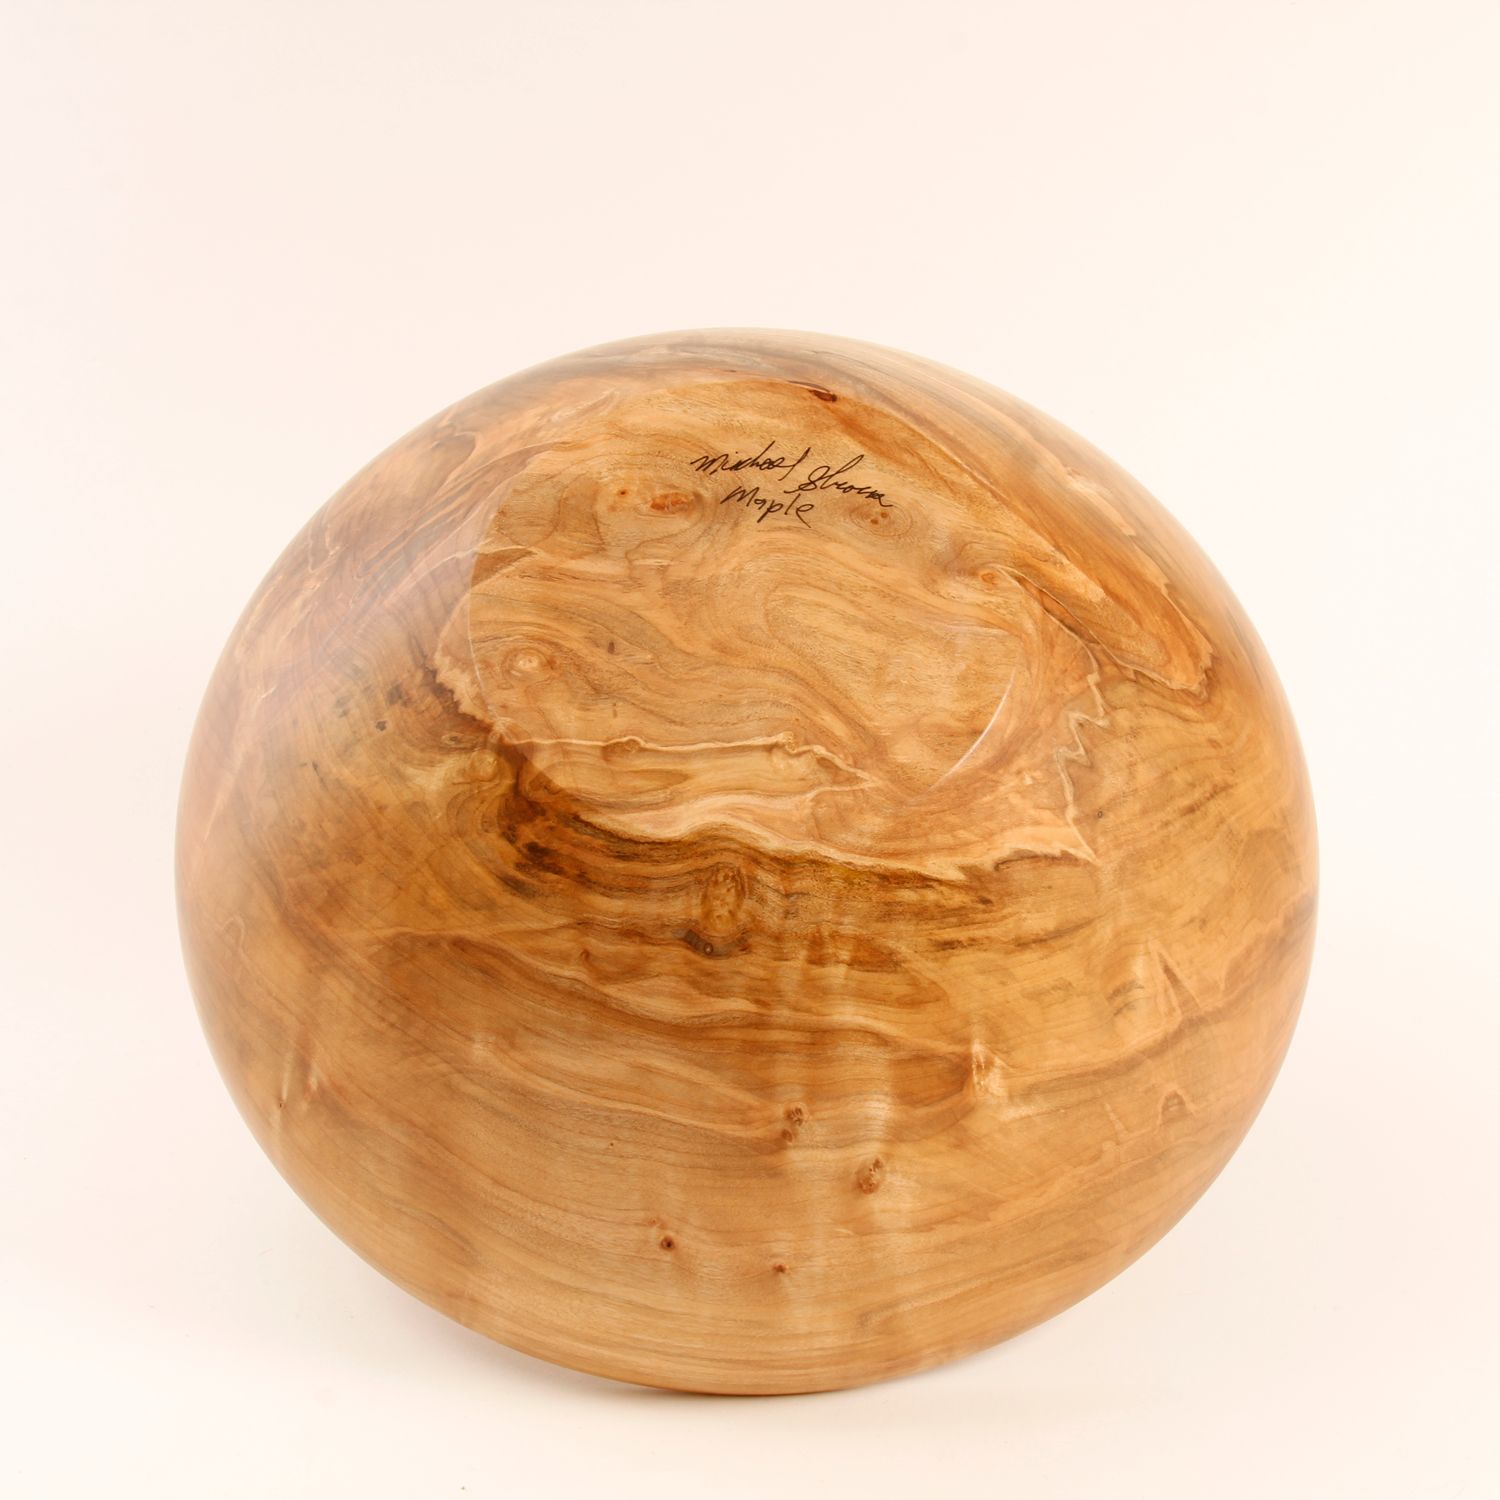 Michael Sbrocca: Large Maple Bowl Product Image 4 of 4